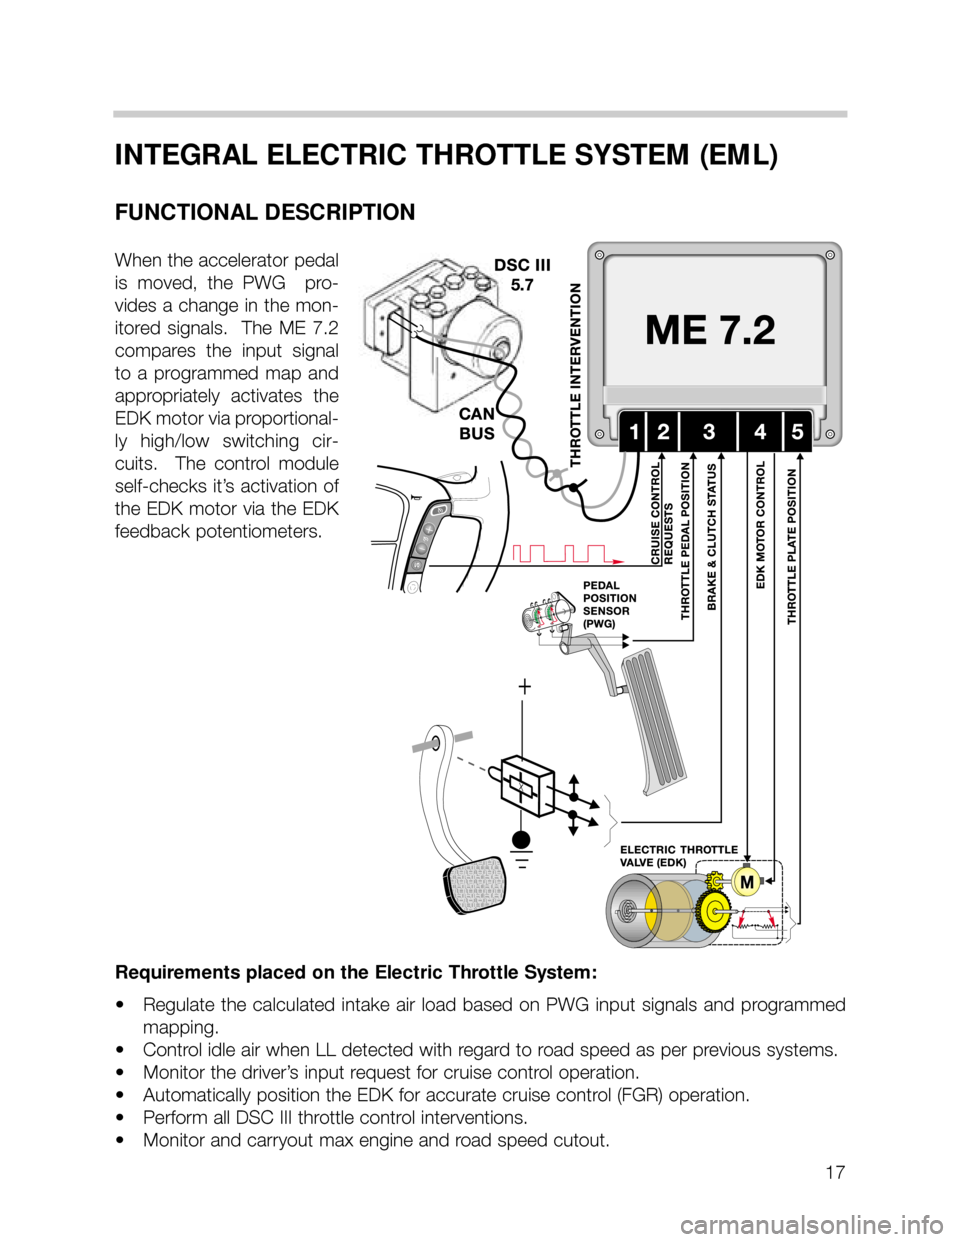 BMW X5 1999 E53 M62TU Engine Workshop Manual 17
INTEGRAL ELECTRIC THROTTLE SYSTEM (EML)
FUNCTIONAL DESCRIPTION
When the accelerator pedal
is  moved,  the  PWG    pro-
vides a change in the mon-
itored  signals.    The  ME  7.2
compares  the  inp